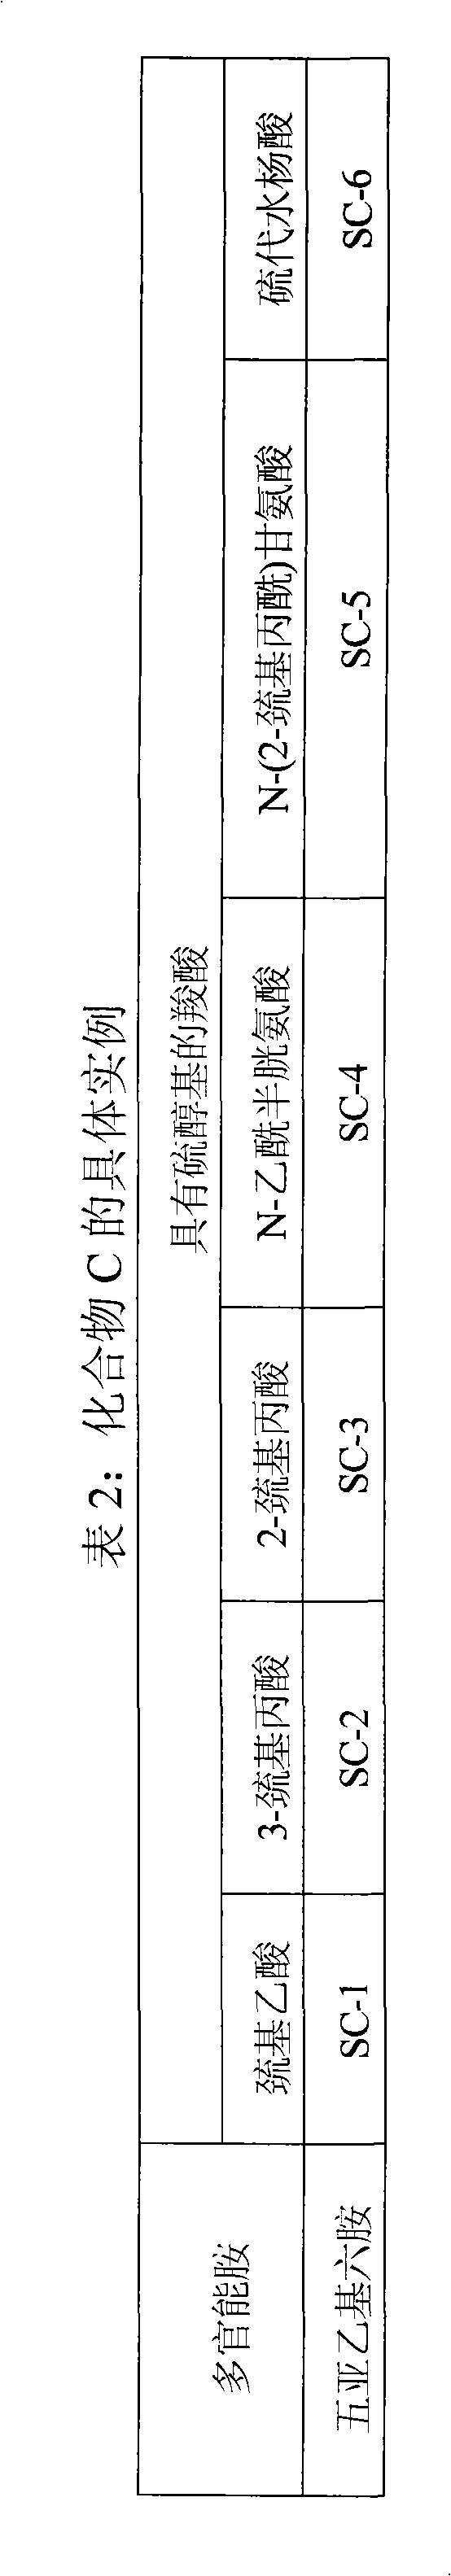 Lithographic printing plate precursor and lithographic printing method